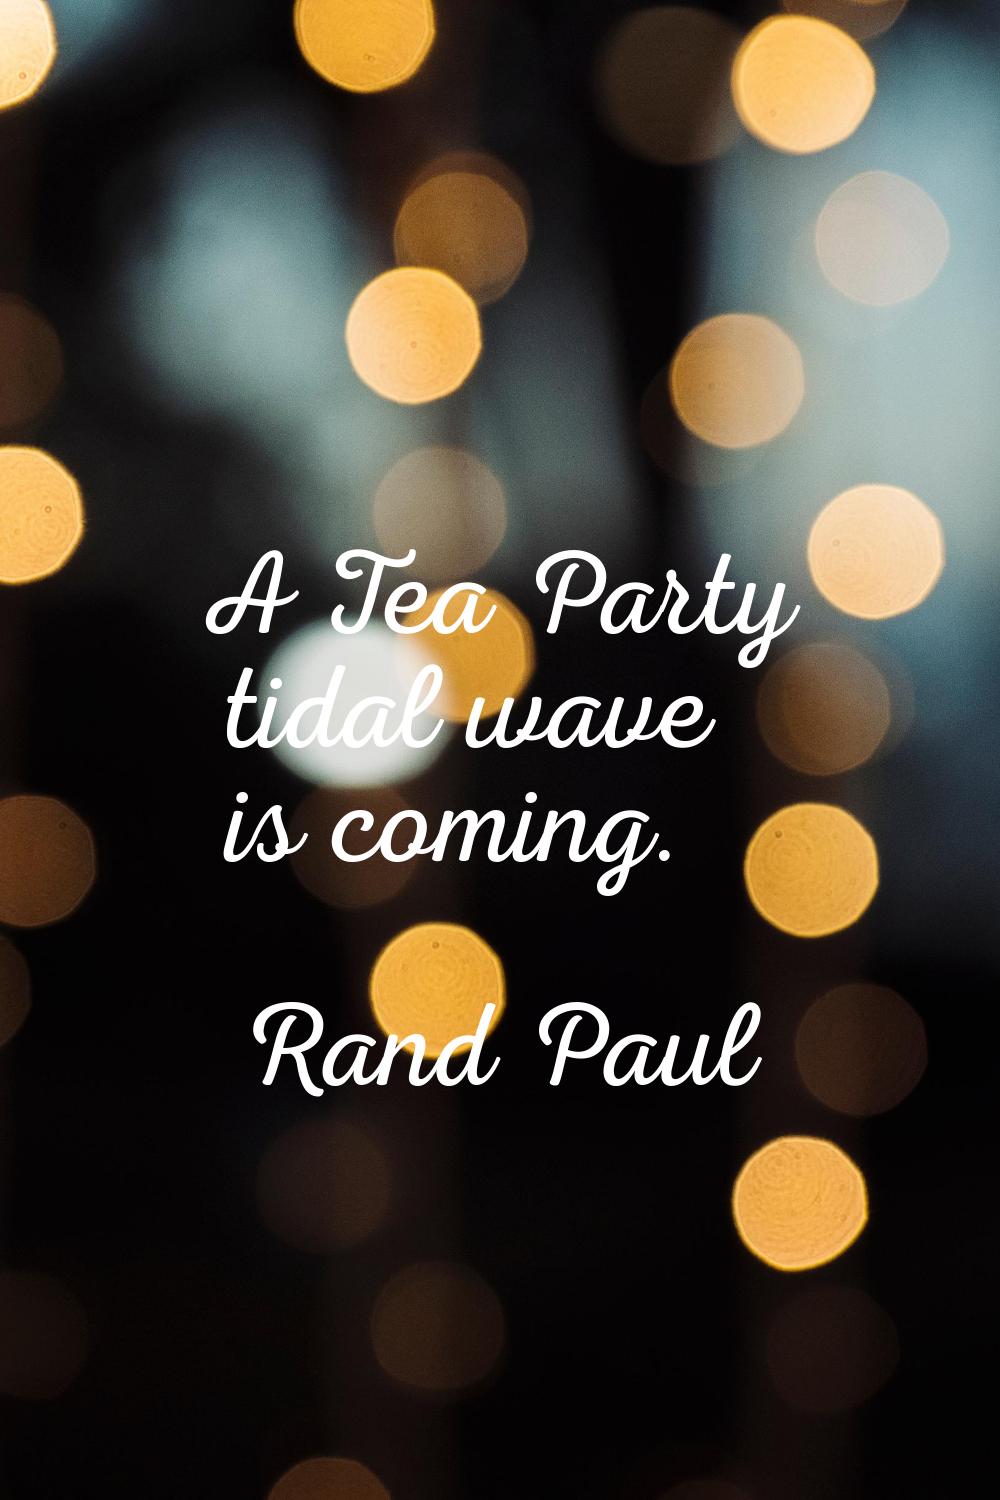 A Tea Party tidal wave is coming.